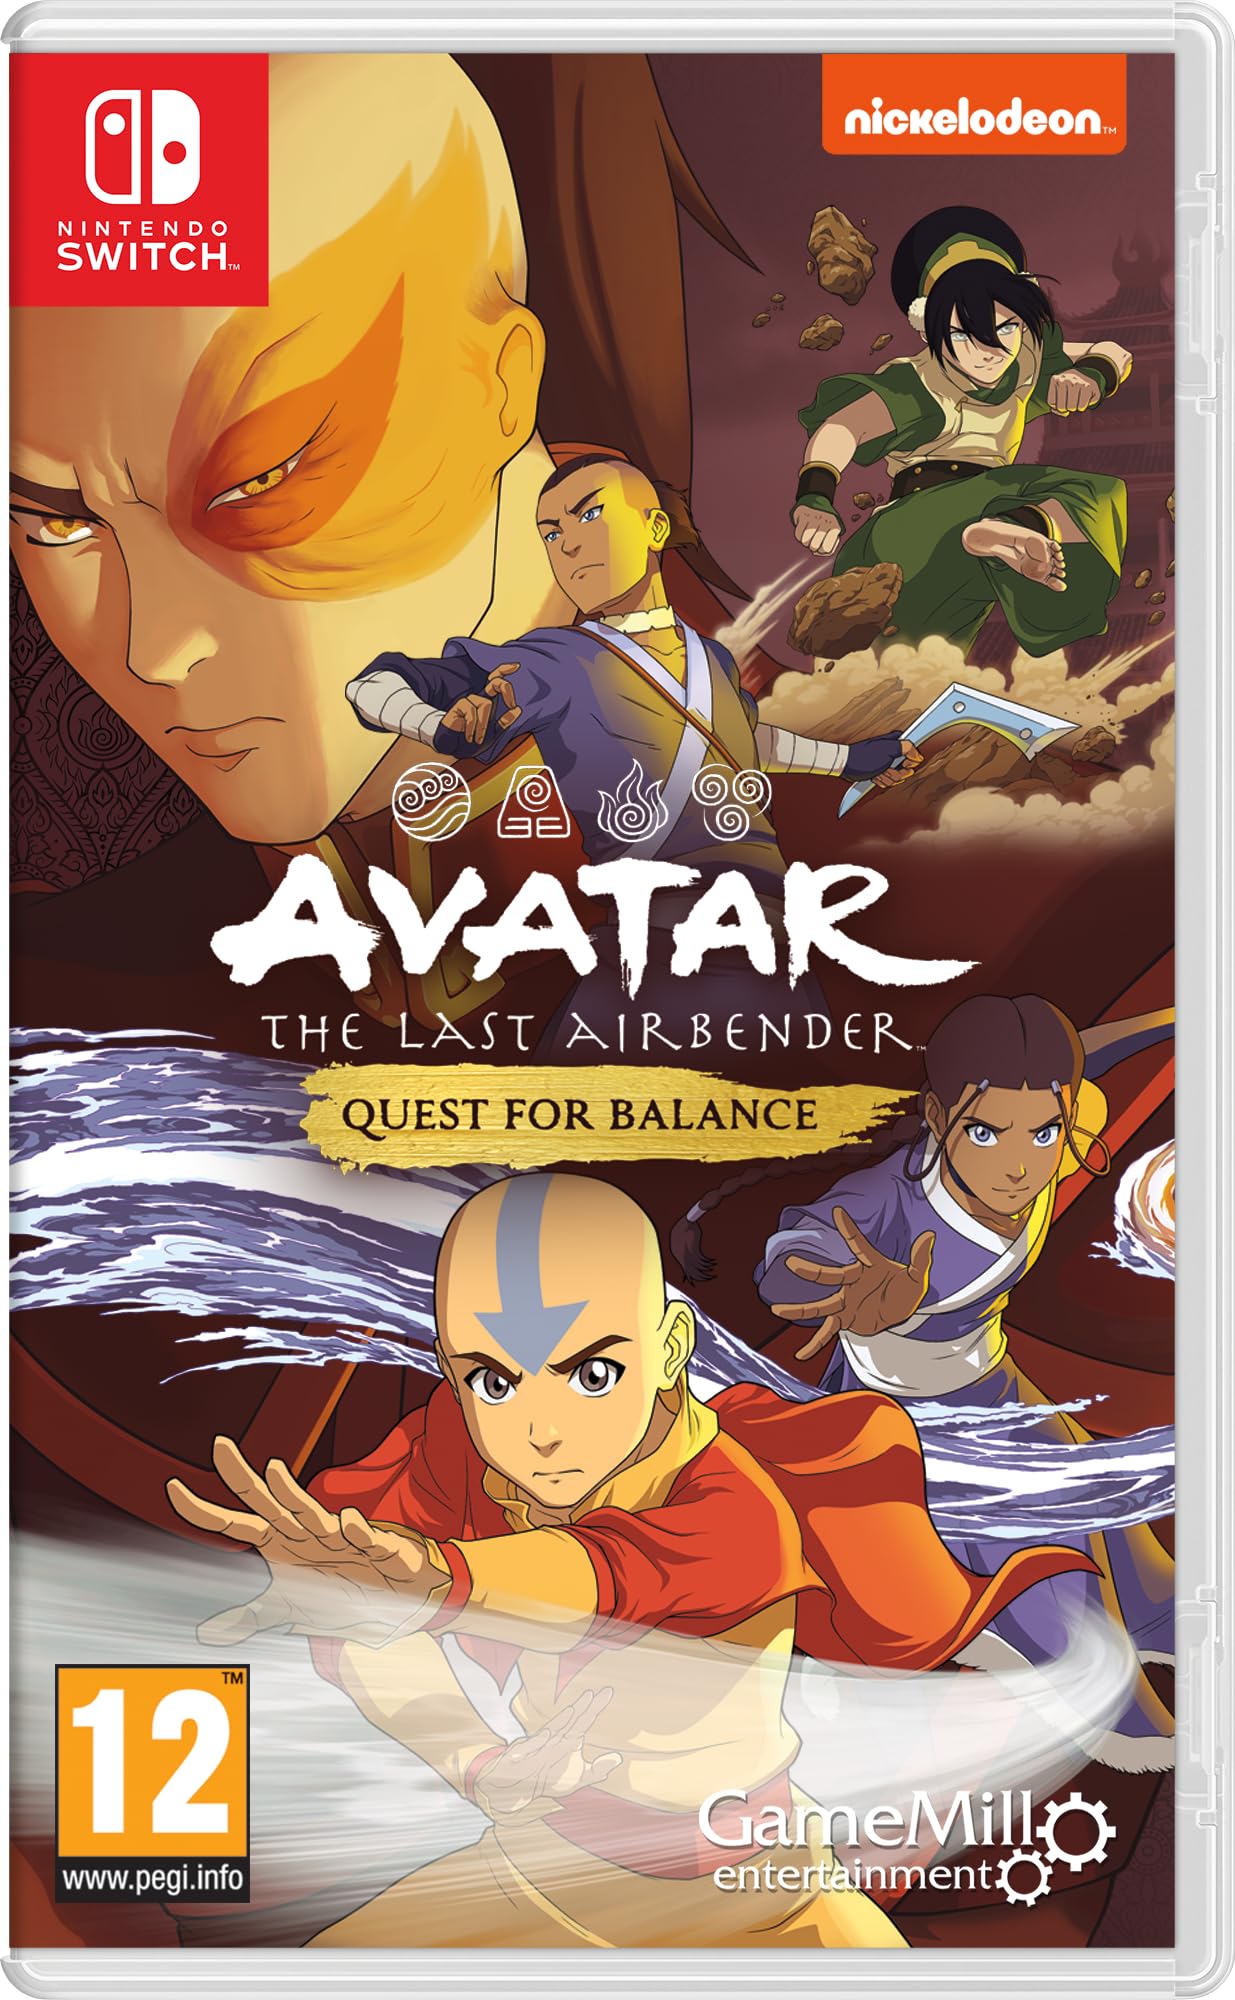 AVATAR THE LAST AIRBENDER SWITCH